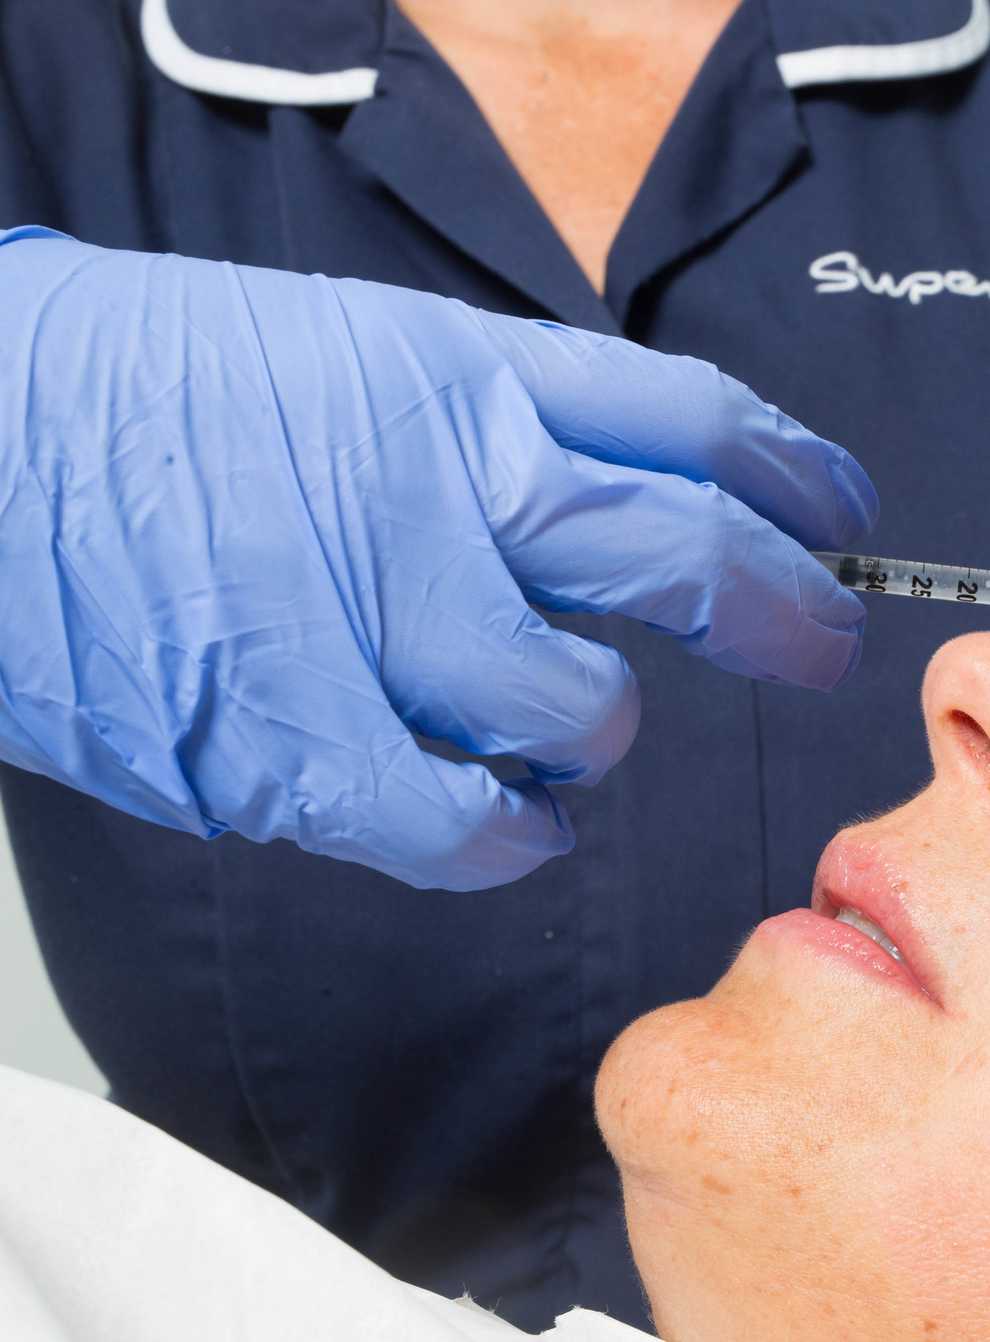 A woman undergoes treatment with Superdrug's Skin Renew Service